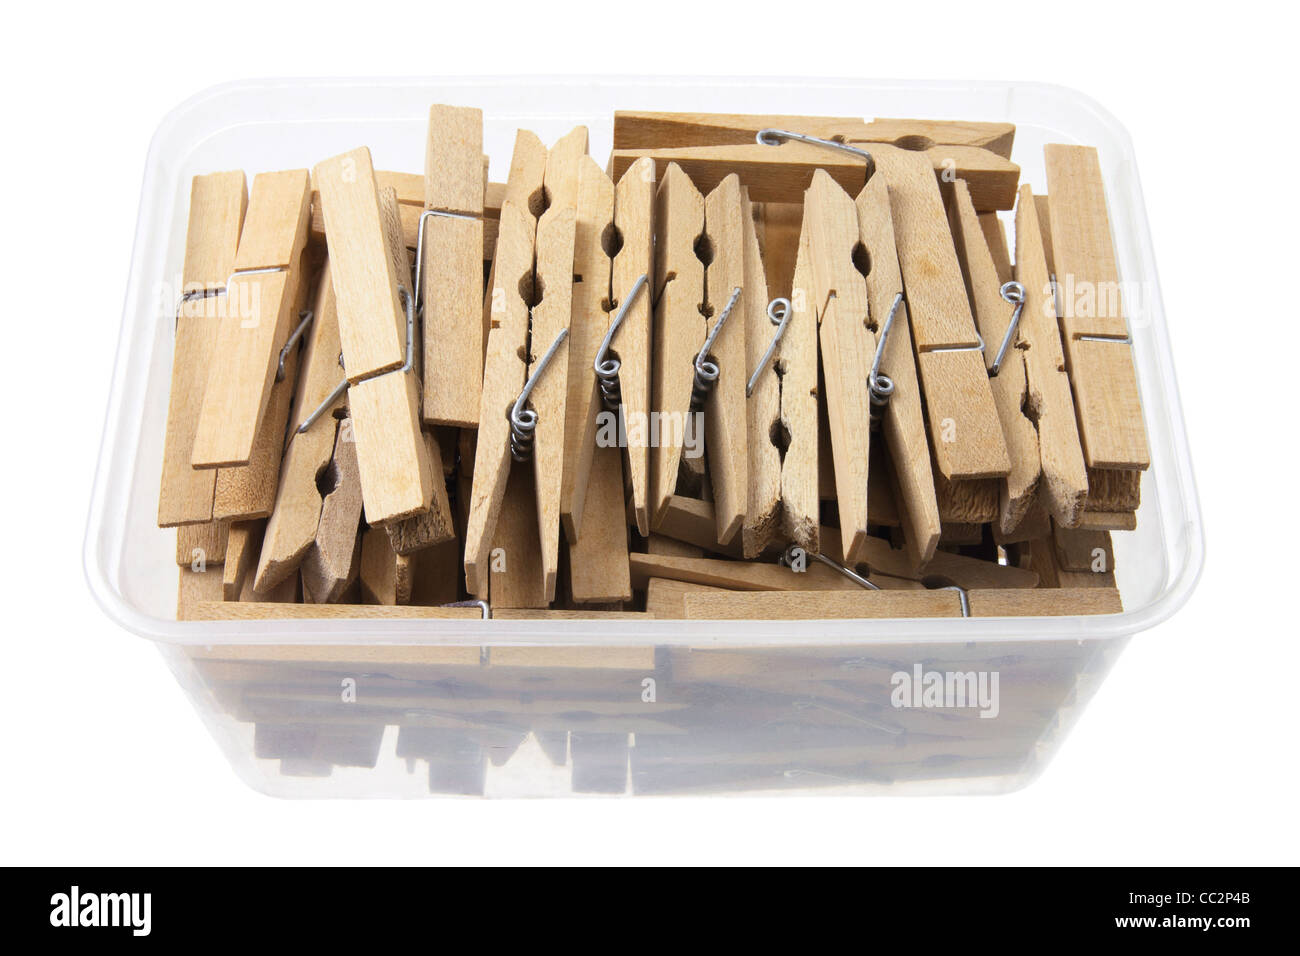 Clothes Pegs in Plastic Container Stock Photo